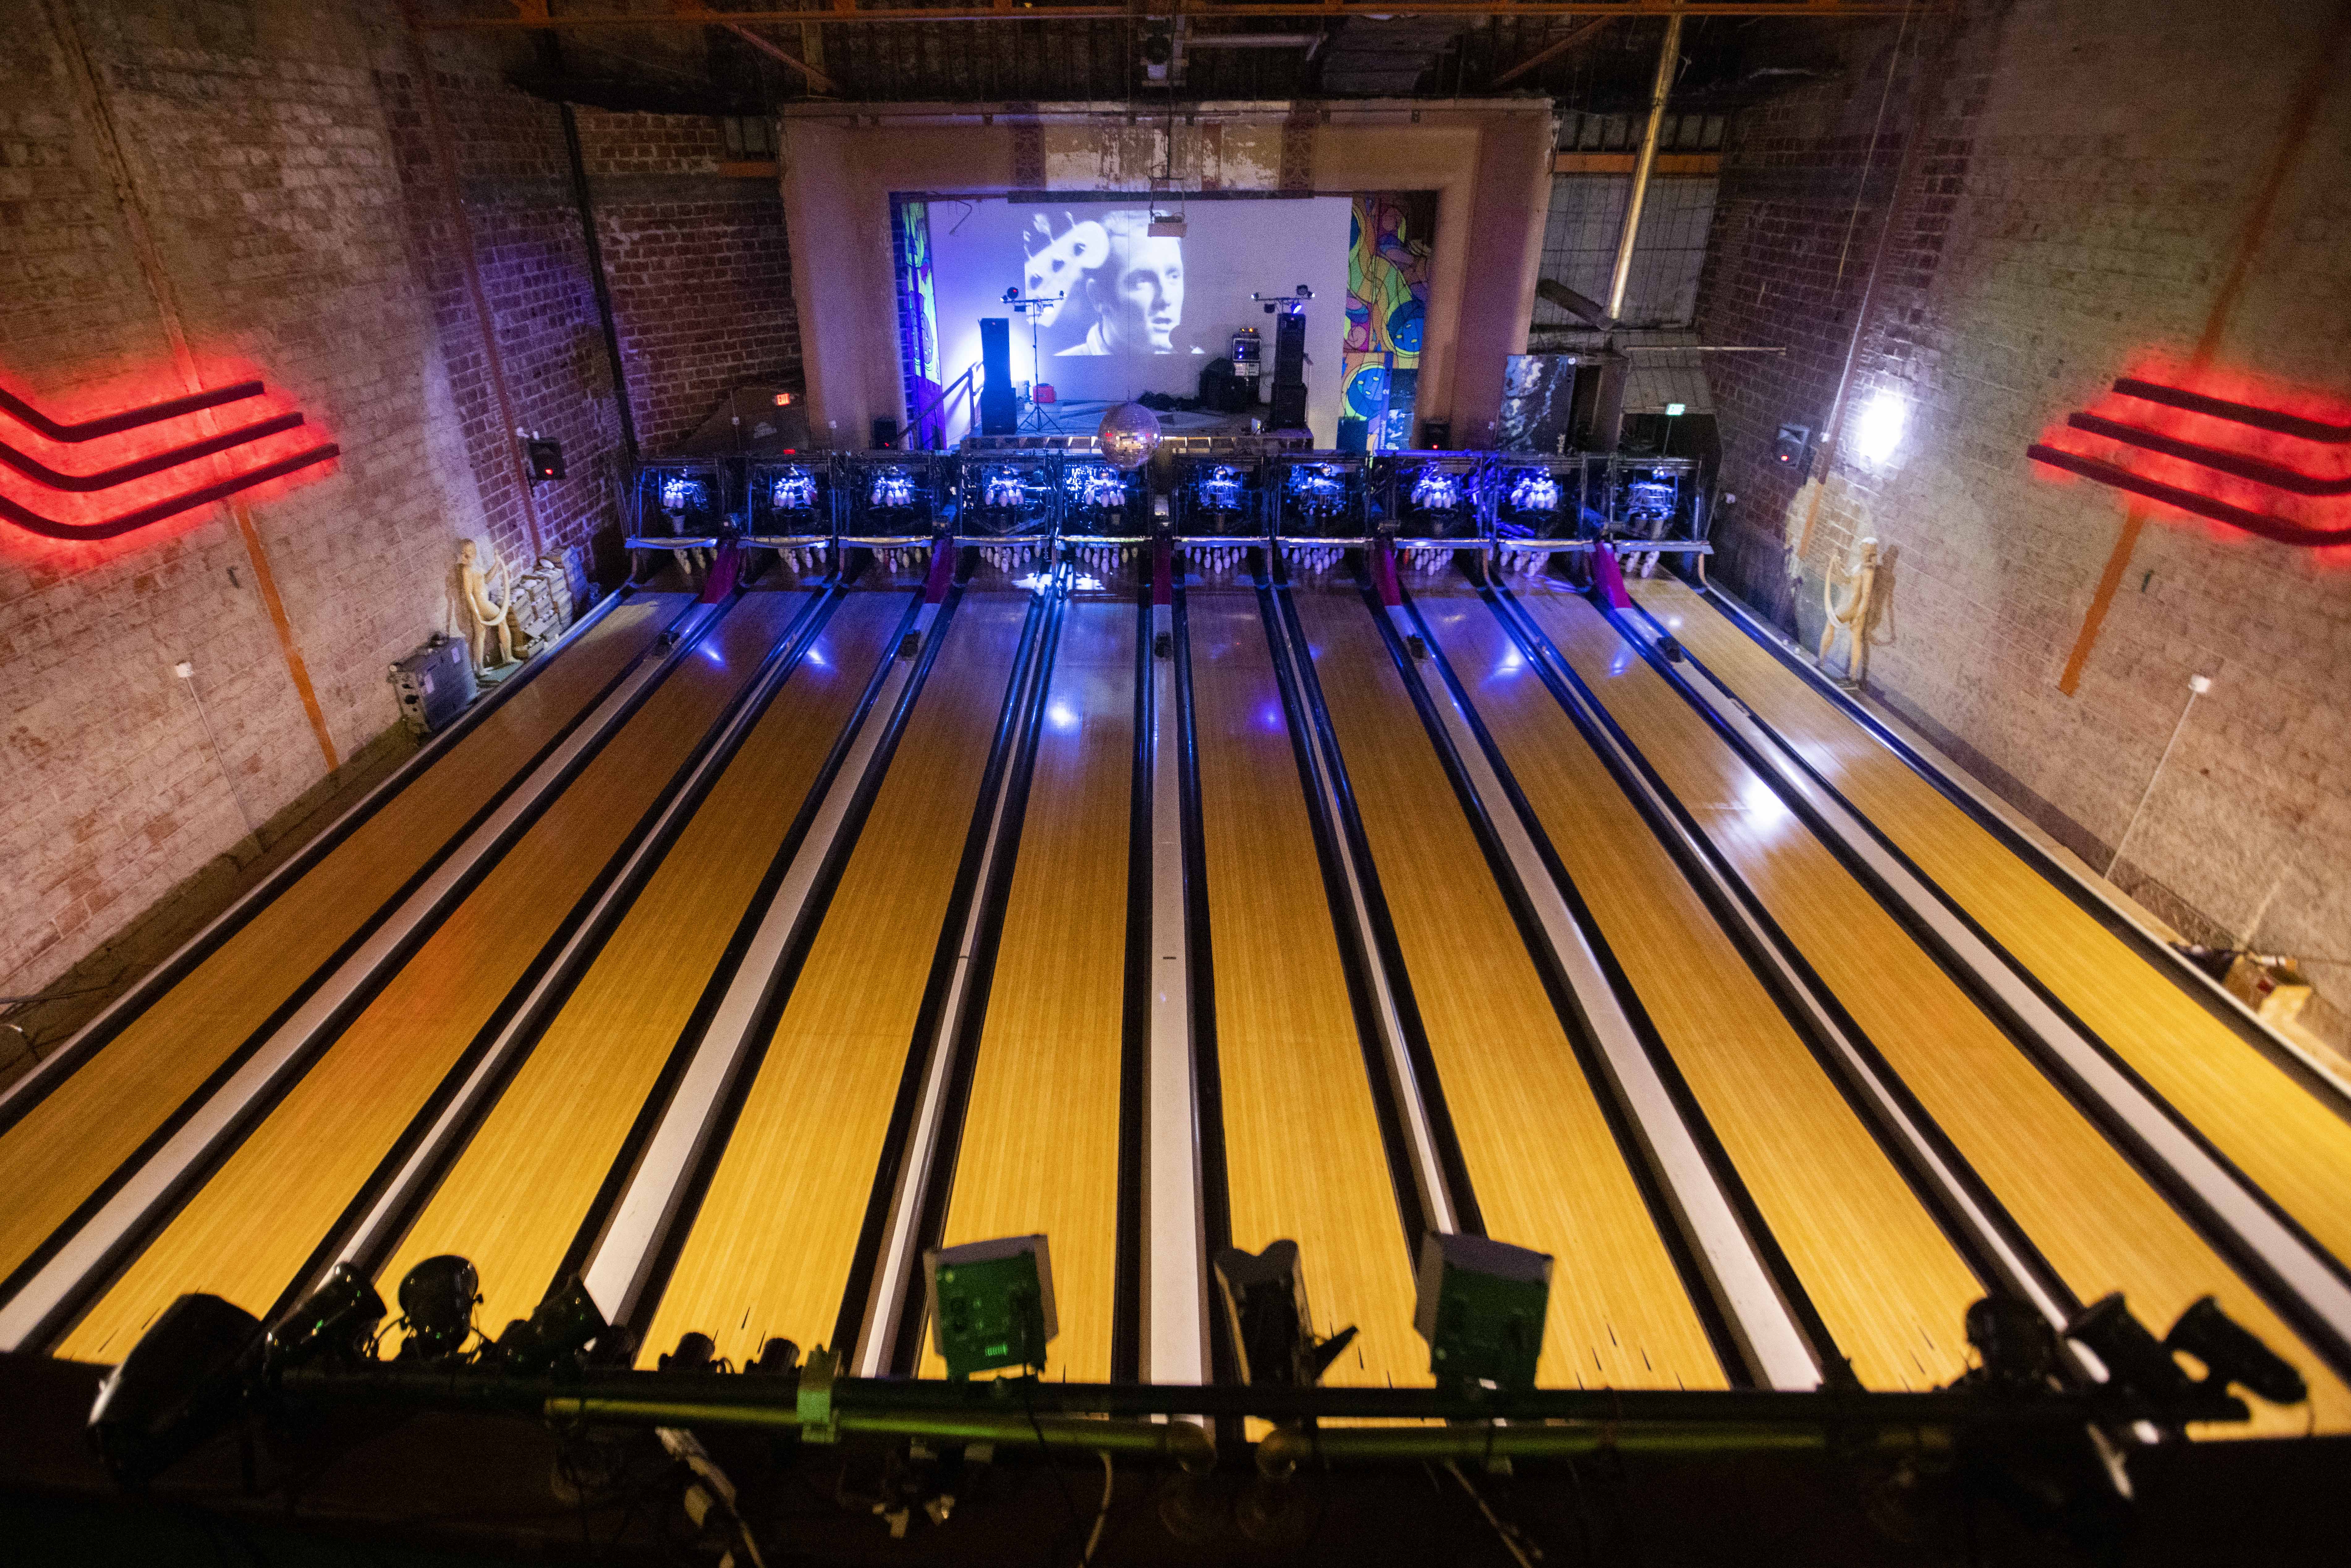 Bowling Alley and Entertainment Venue To Open in Revamped SouthSide Works